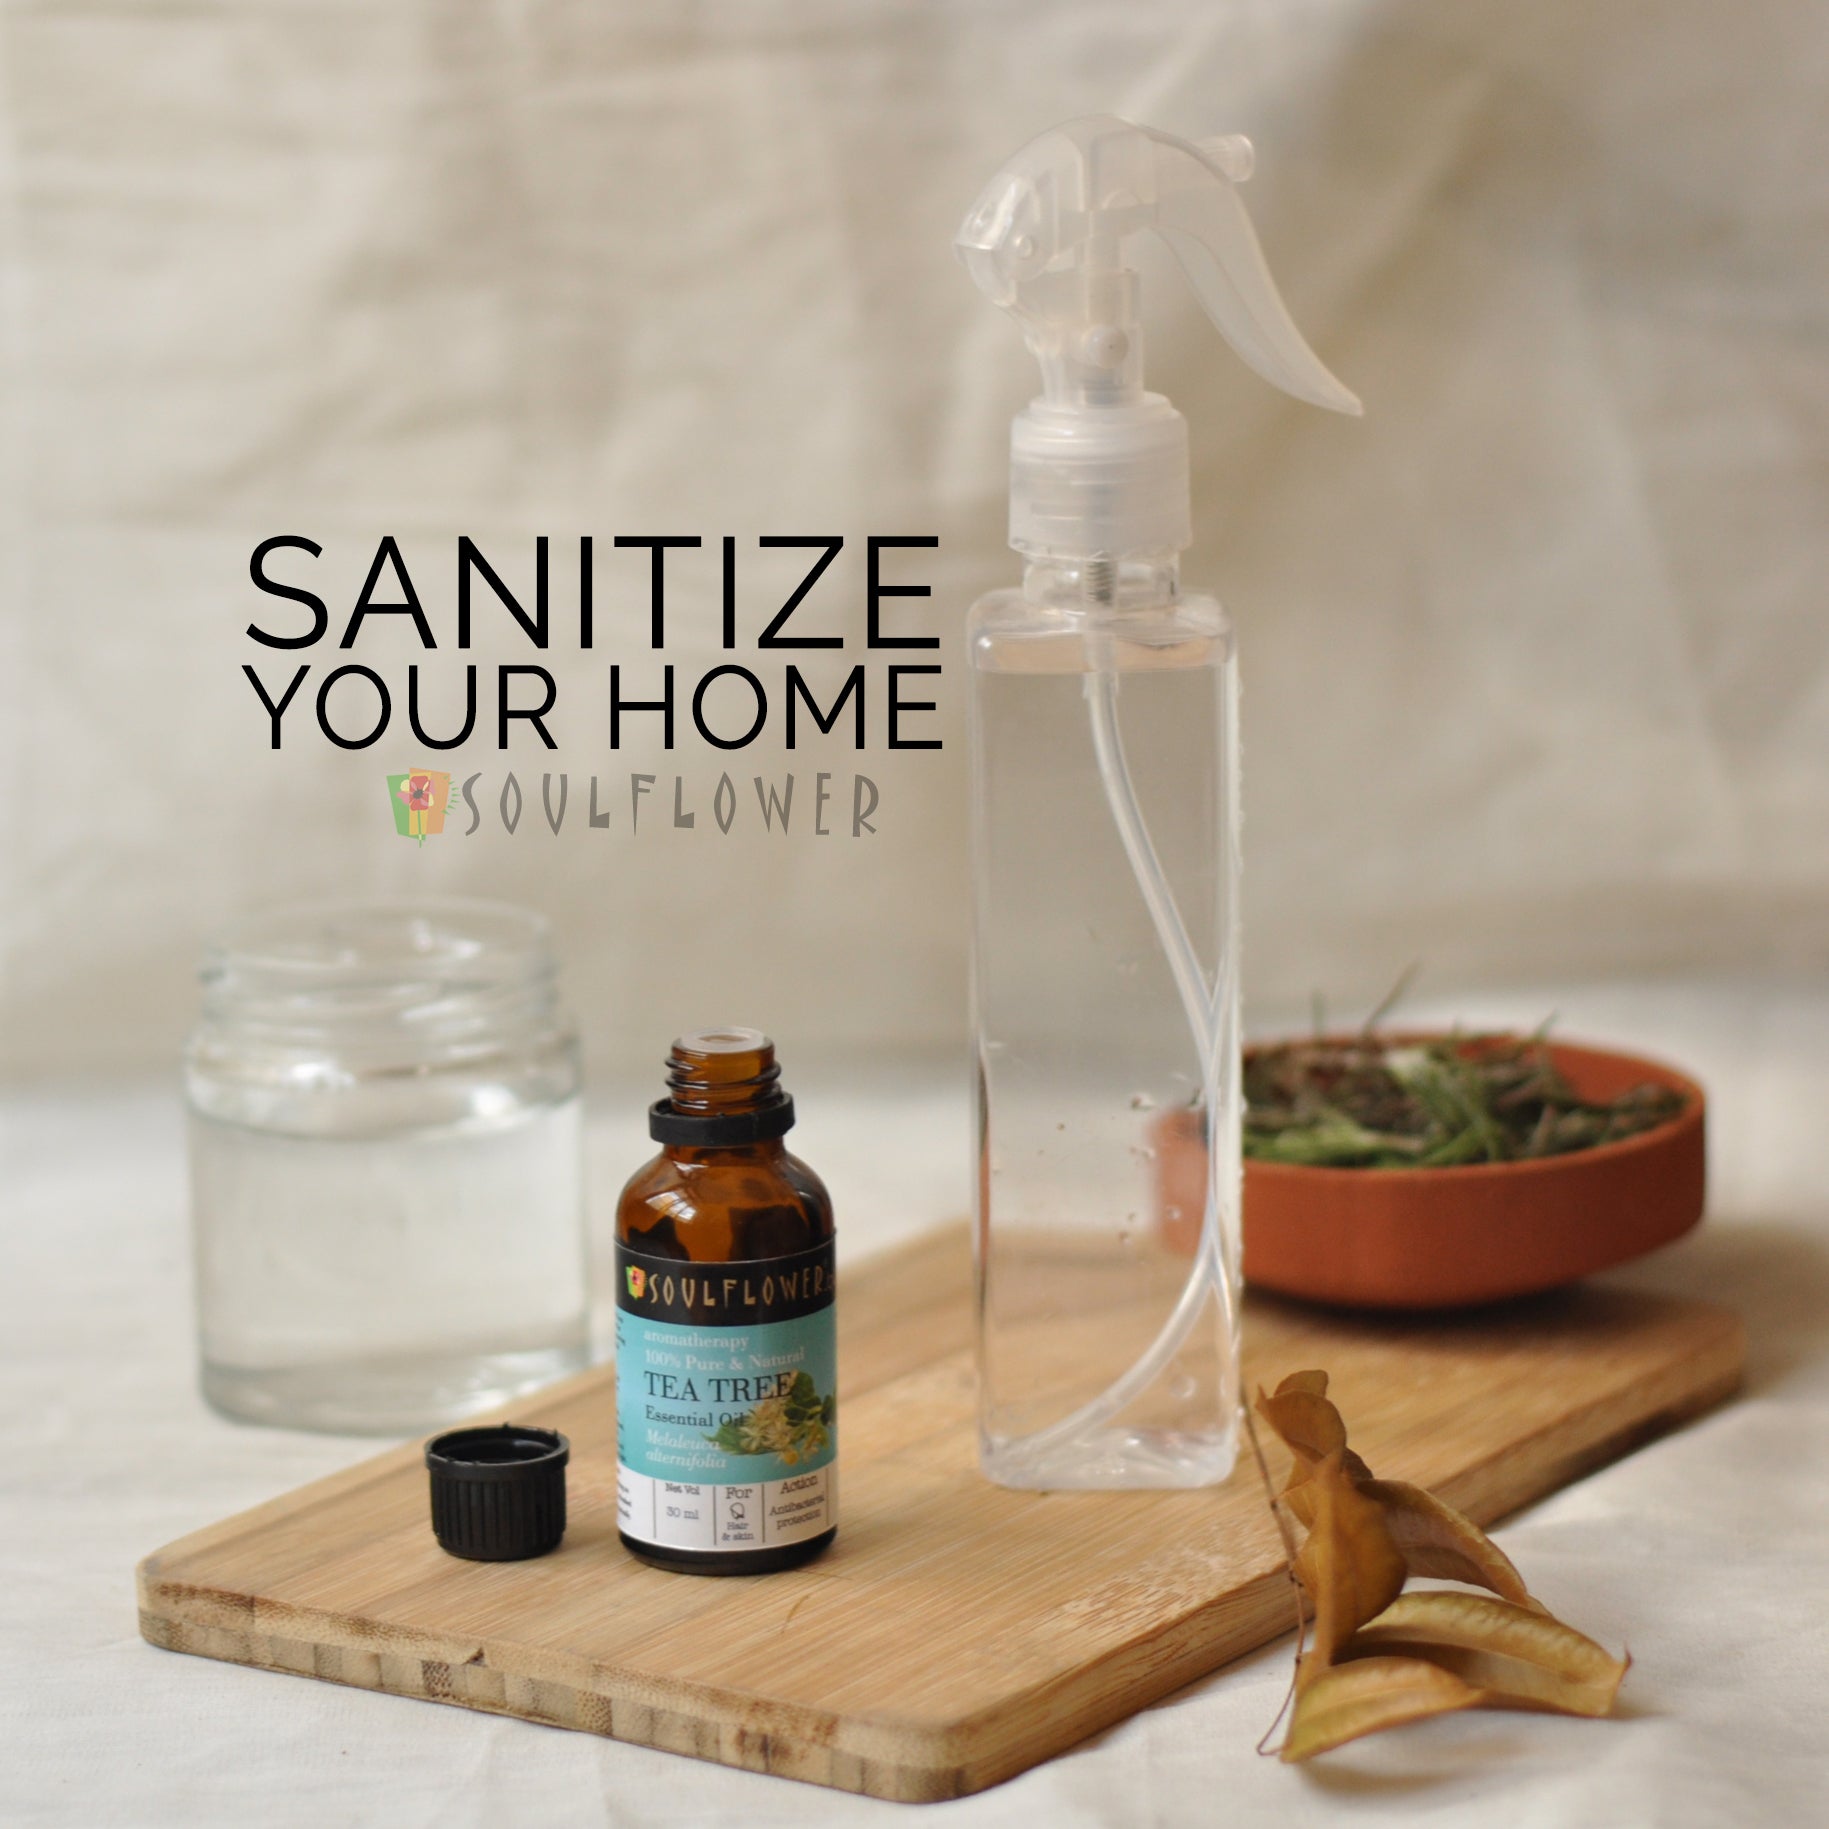 Sanitize Your Home!